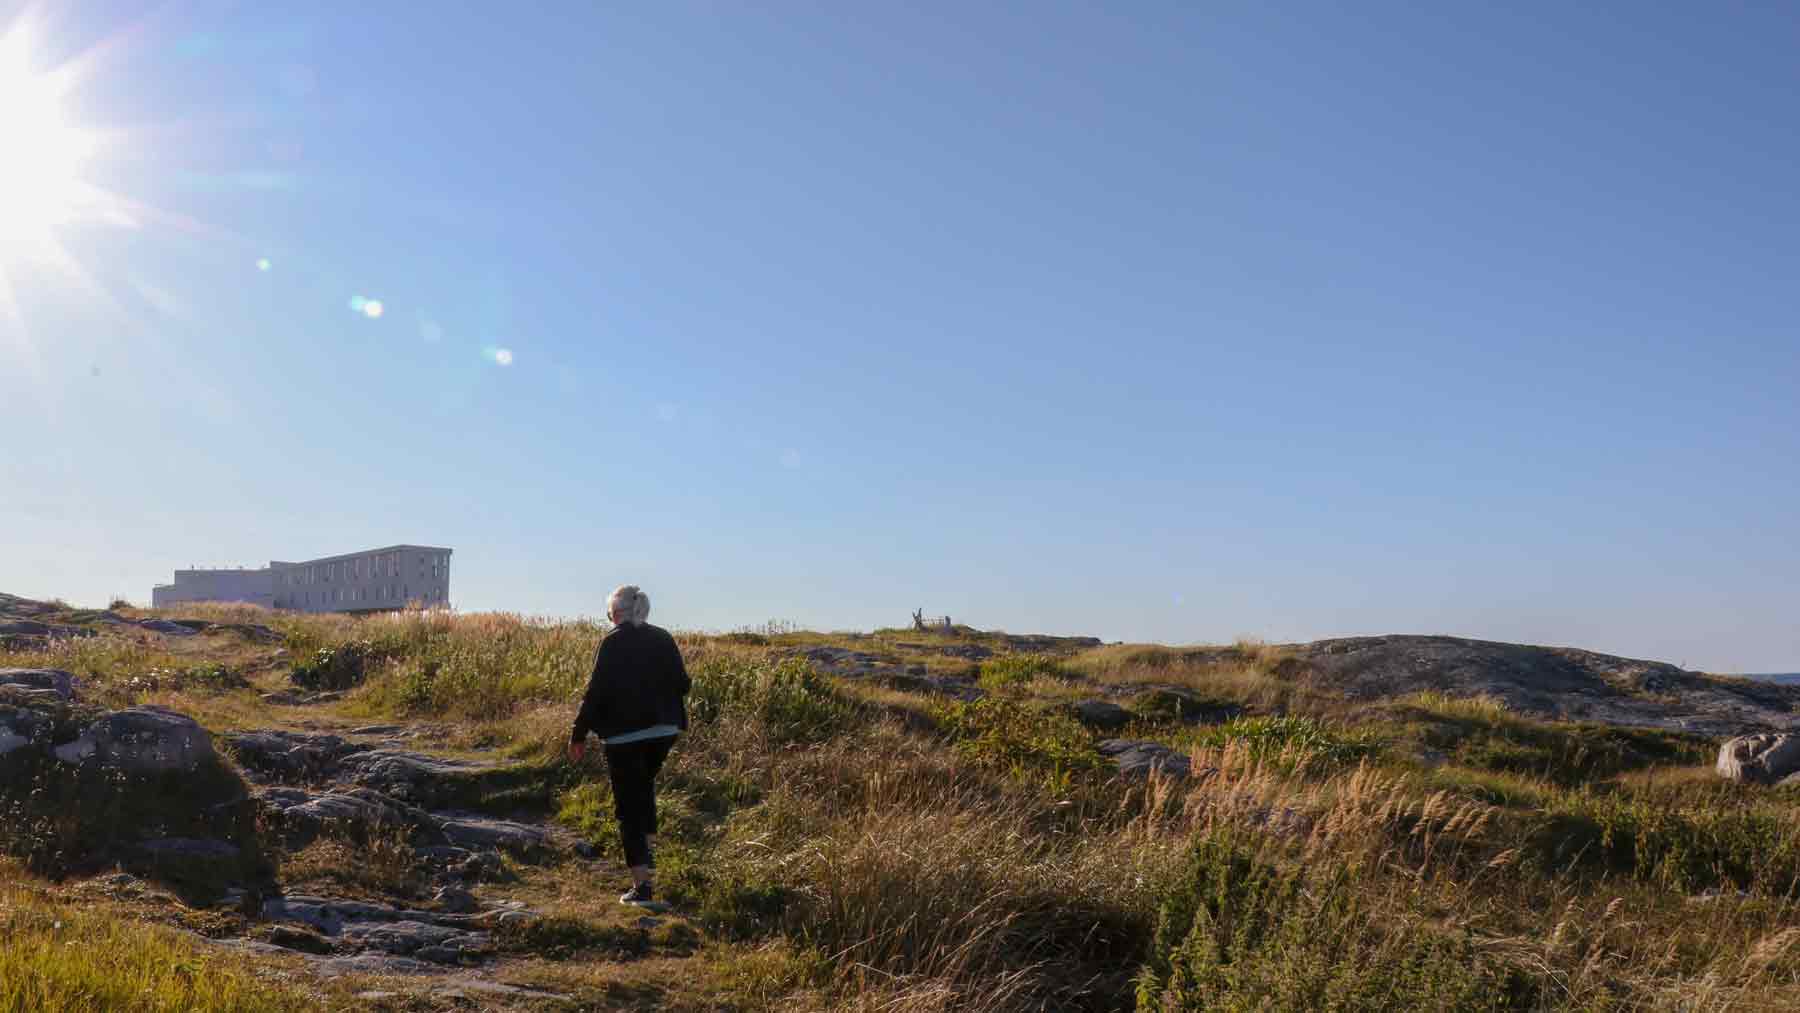 The Asmuss founder's Mum walking up a hill into the sun on Fogo Island